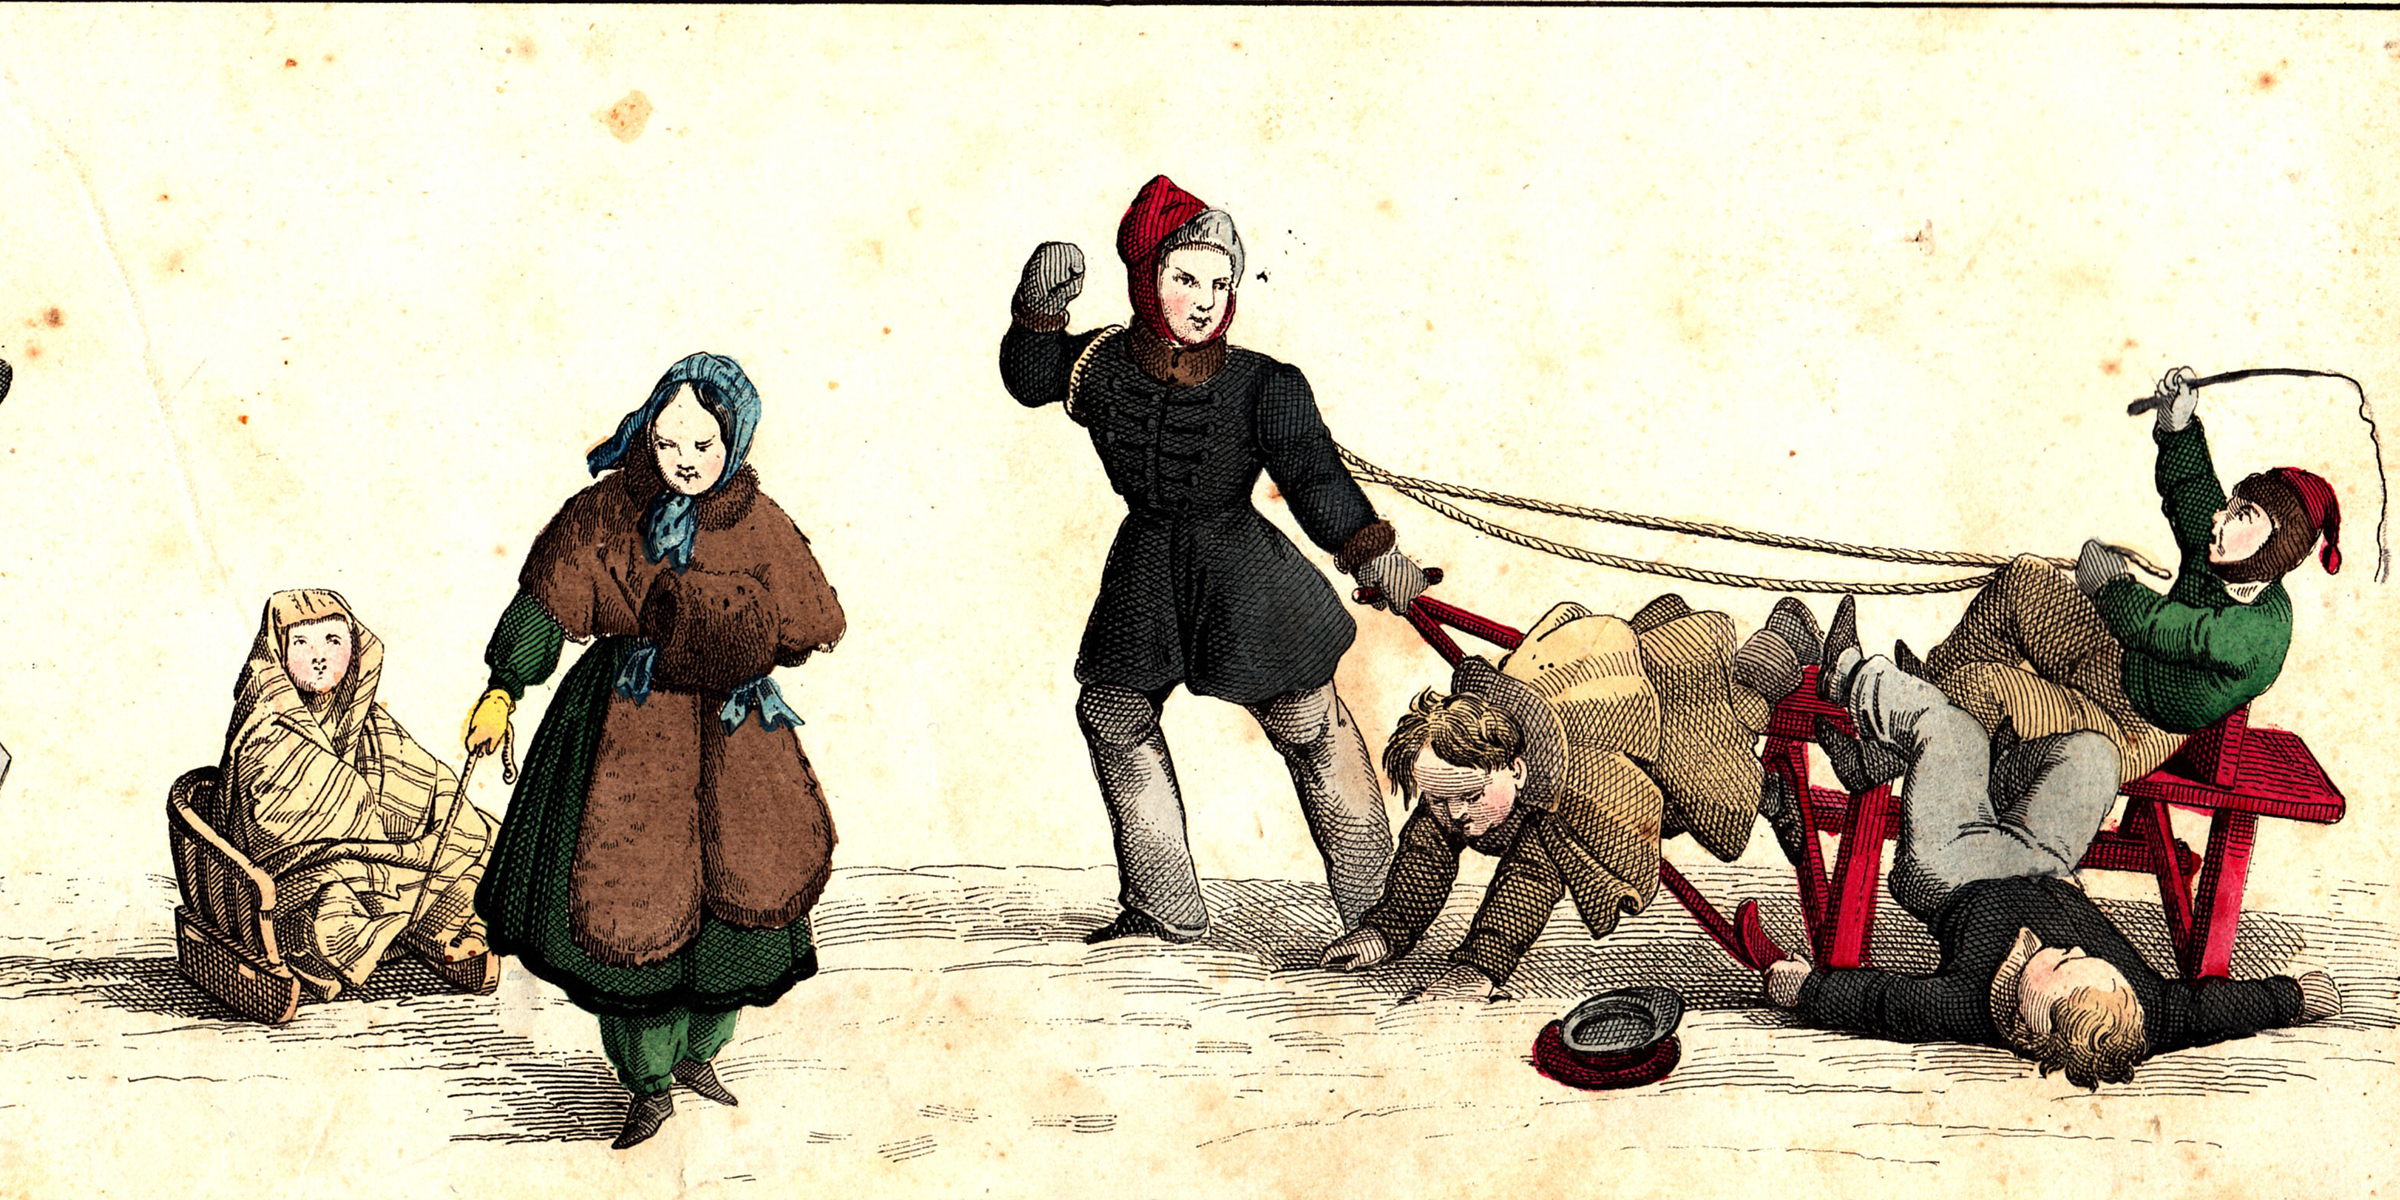 Illustration of people on sledges from a German children’s book, c. 1850. Archive of the author.